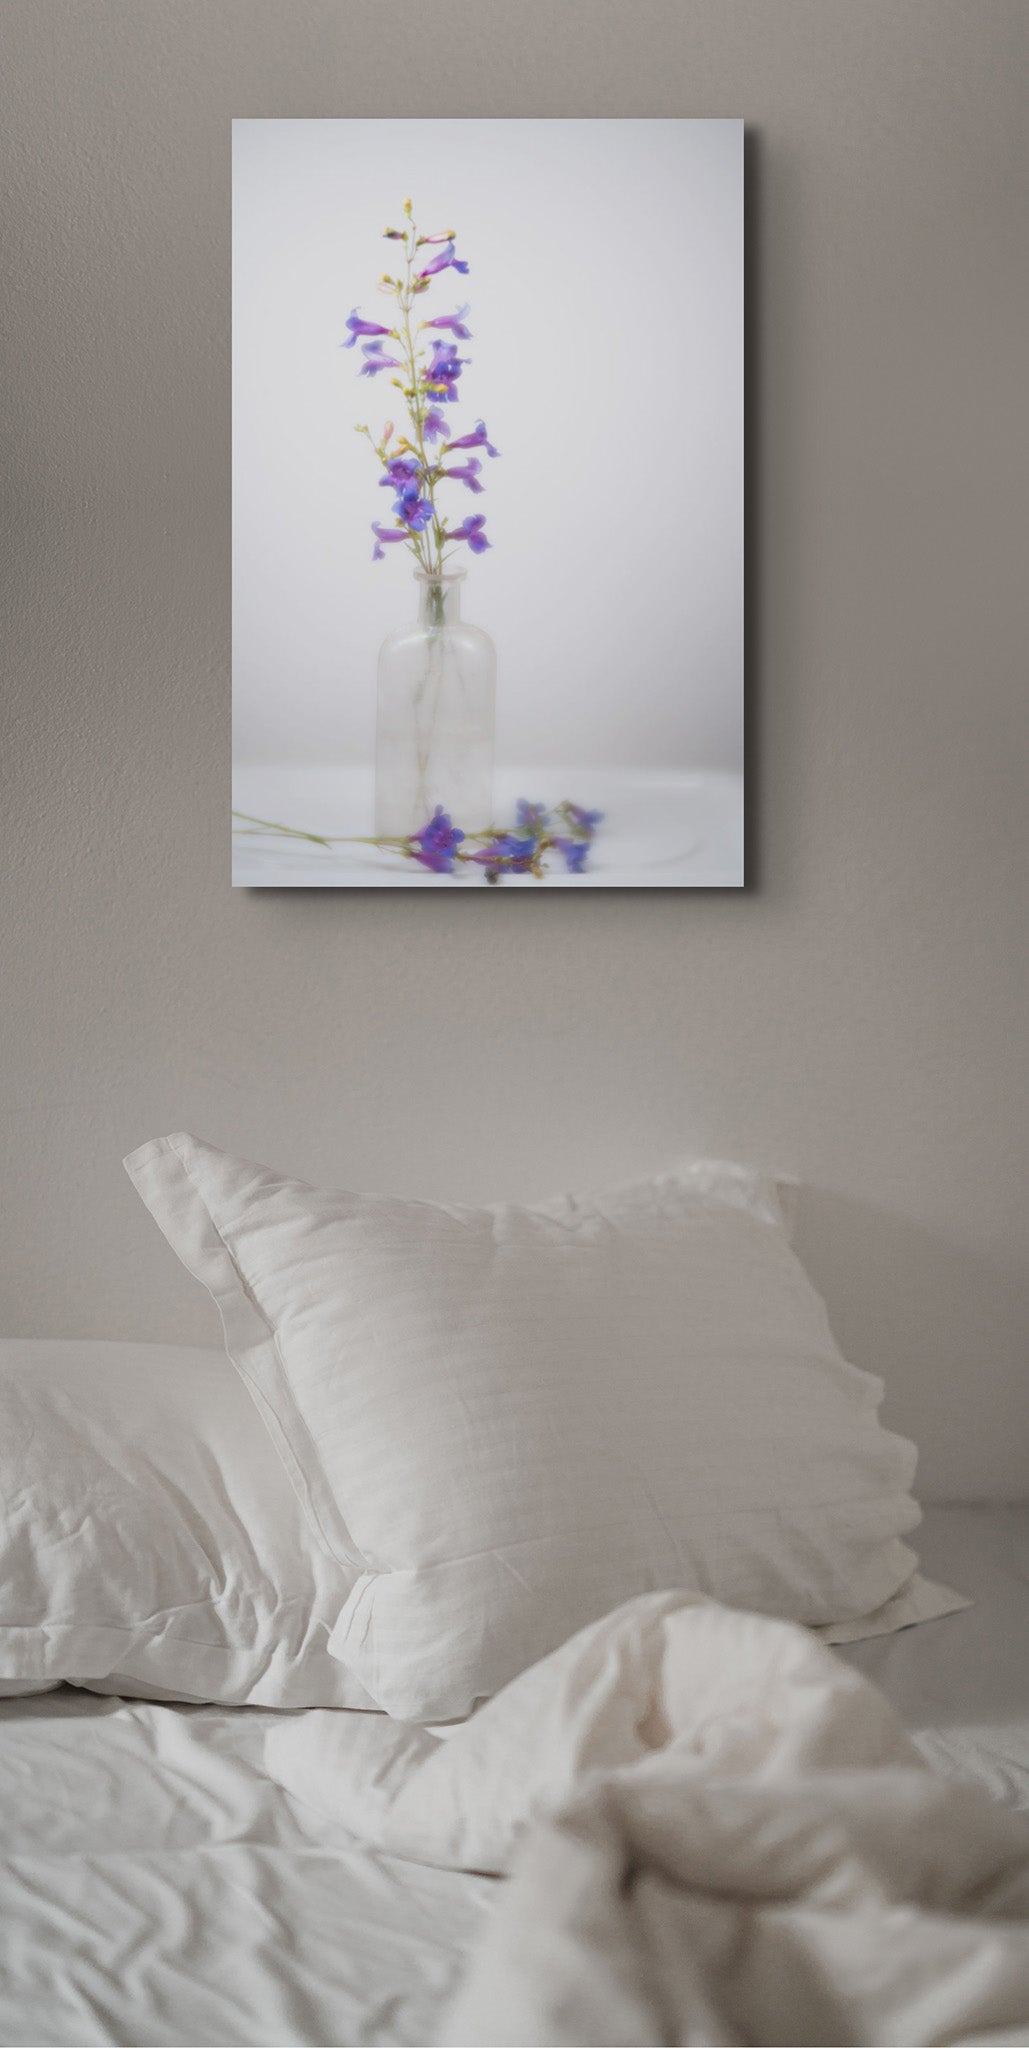 Picture hanging on the wall of a bedroom. The picture is a fine art photograph of wildflowers in a jar by Cameron Dreaux. 